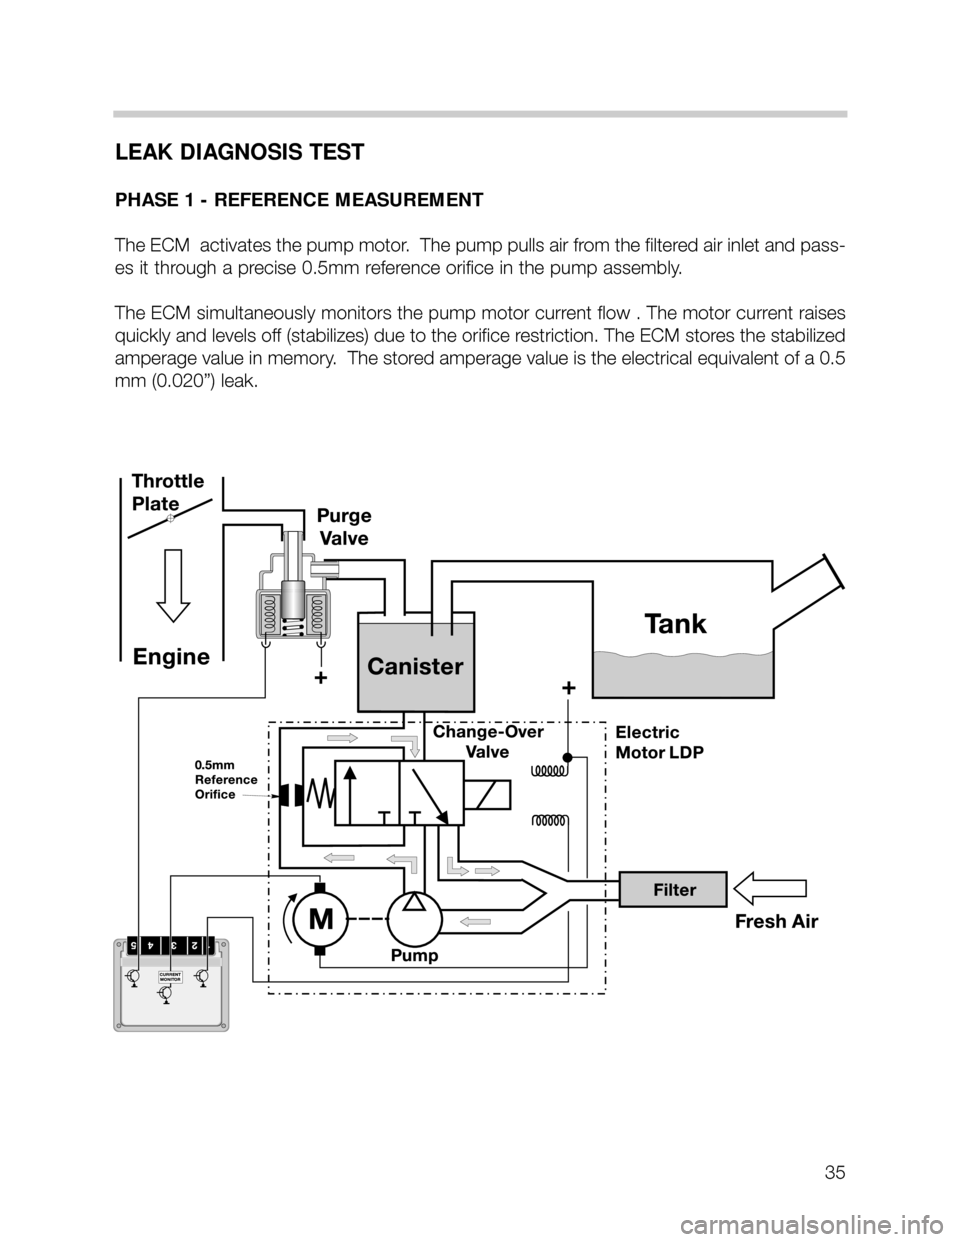 BMW 735i 2001 E38 M62TU Engine Owners Guide LEAK DIAGNOSIS TEST
PHASE 1 - REFERENCE MEASUREMENT
The ECM  activates the pump motor.  The pump pulls air from the filtered air inlet and pass-
es it through a precise 0.5mm reference orifice in the 